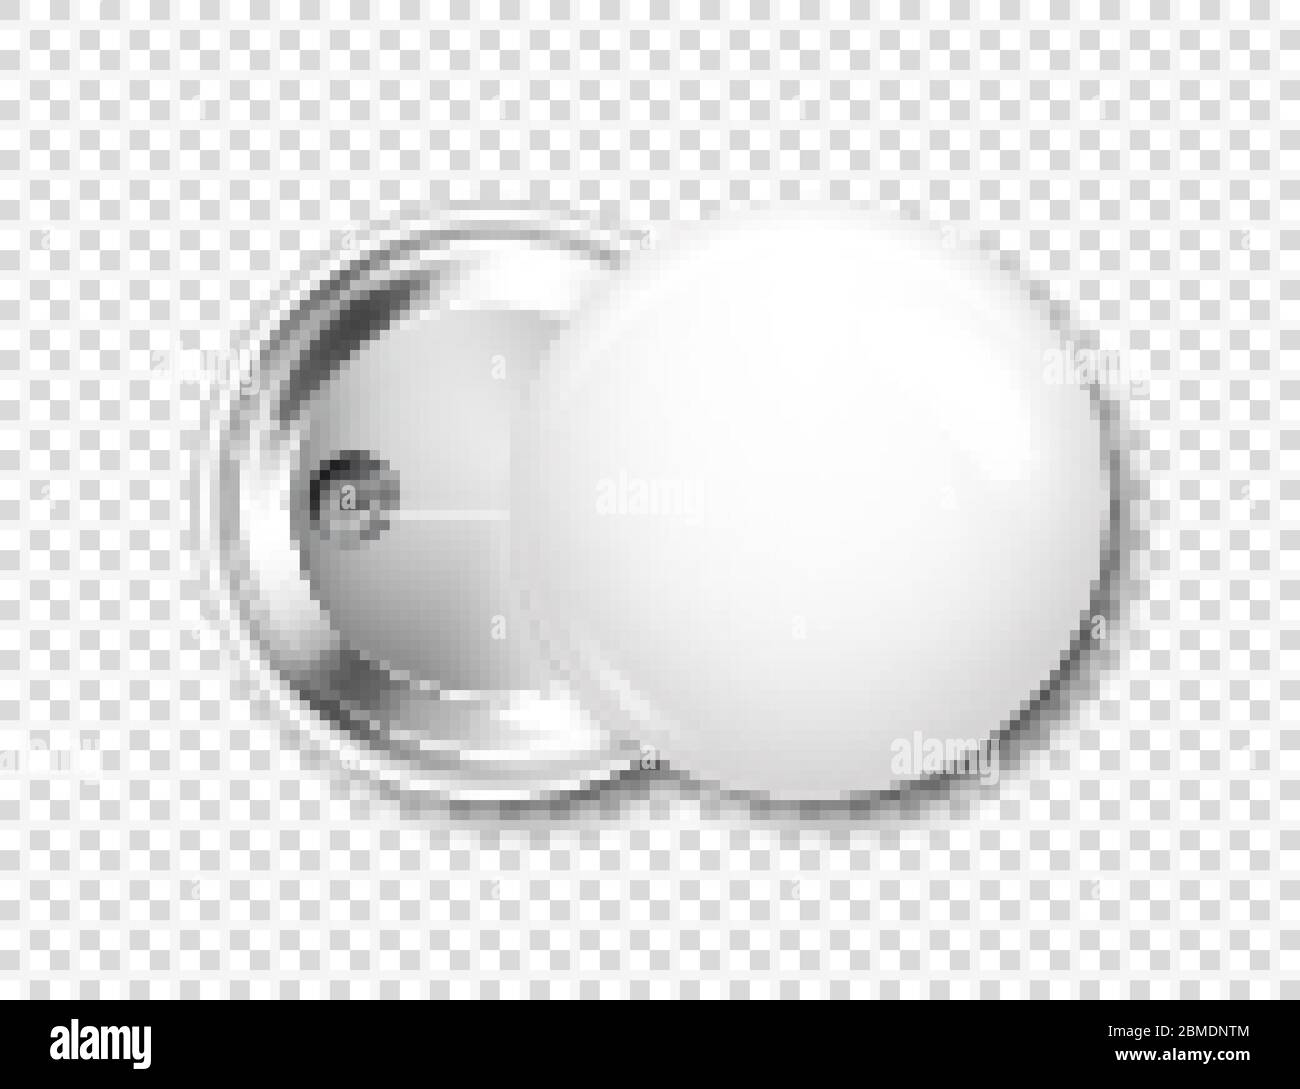 Pin badges blank round metal button badge Vector Image